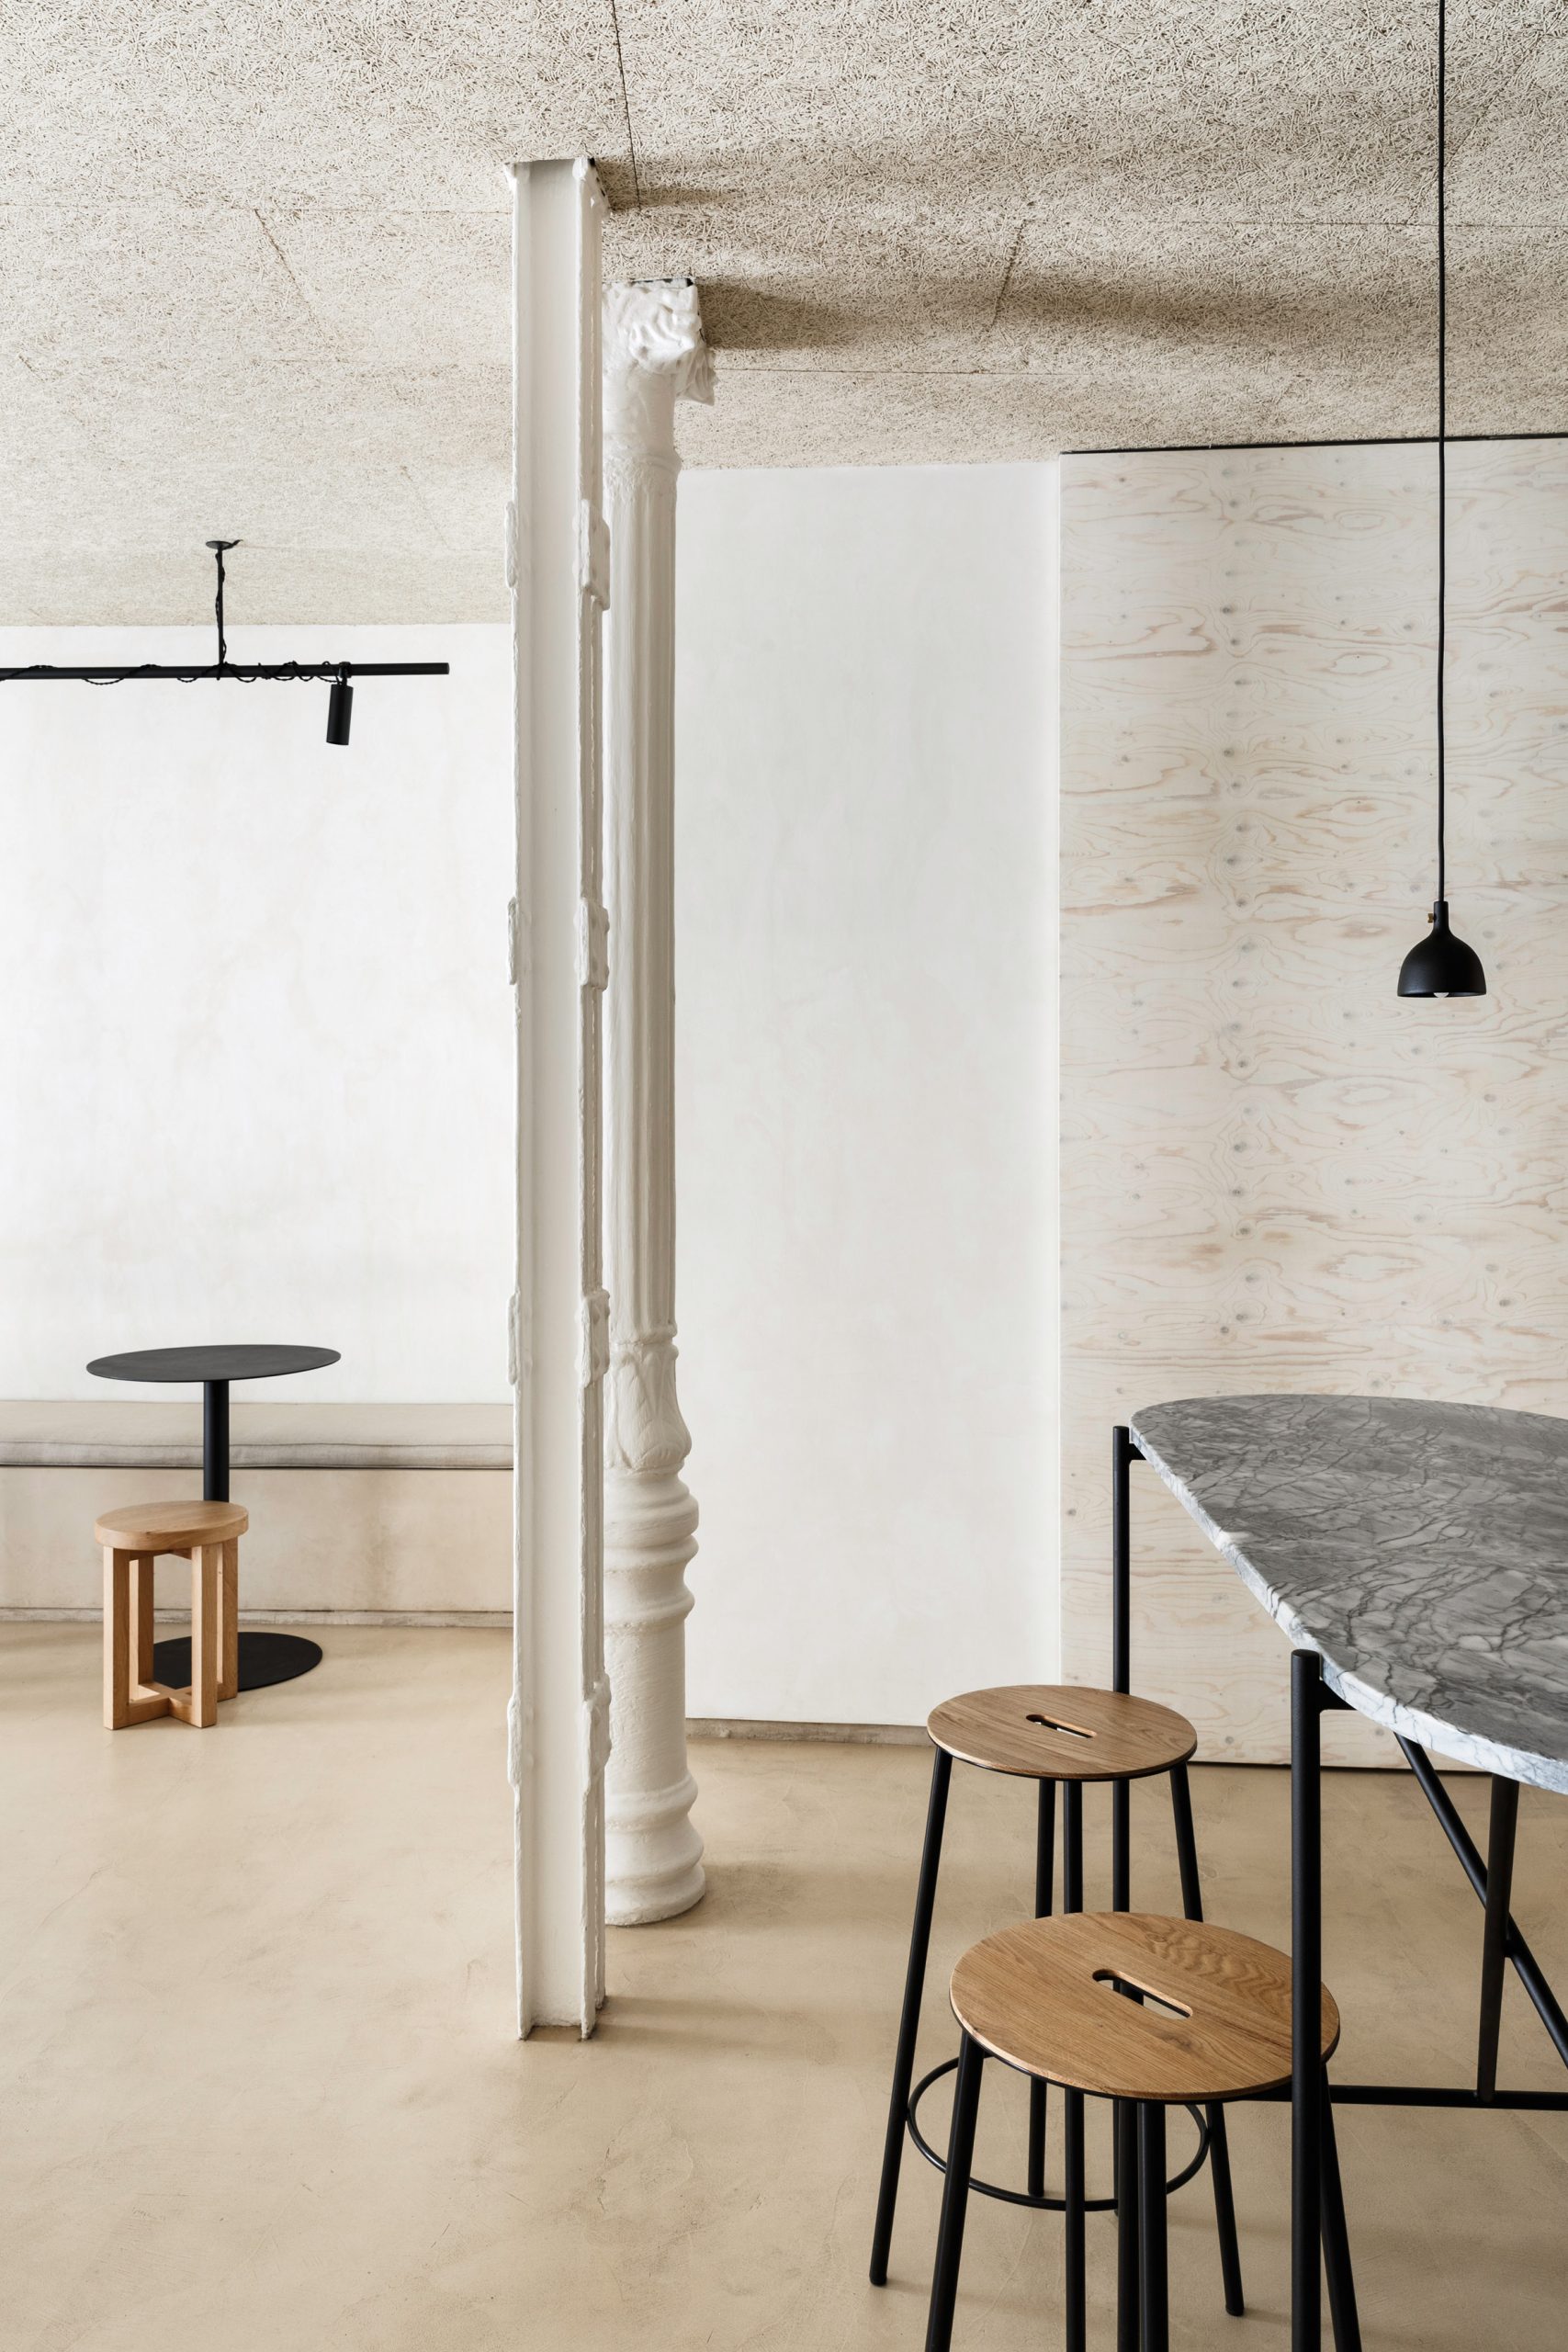 Informal dining area of Zuppa restaurant by Plantea Estudio with wood, steel and marble furniture